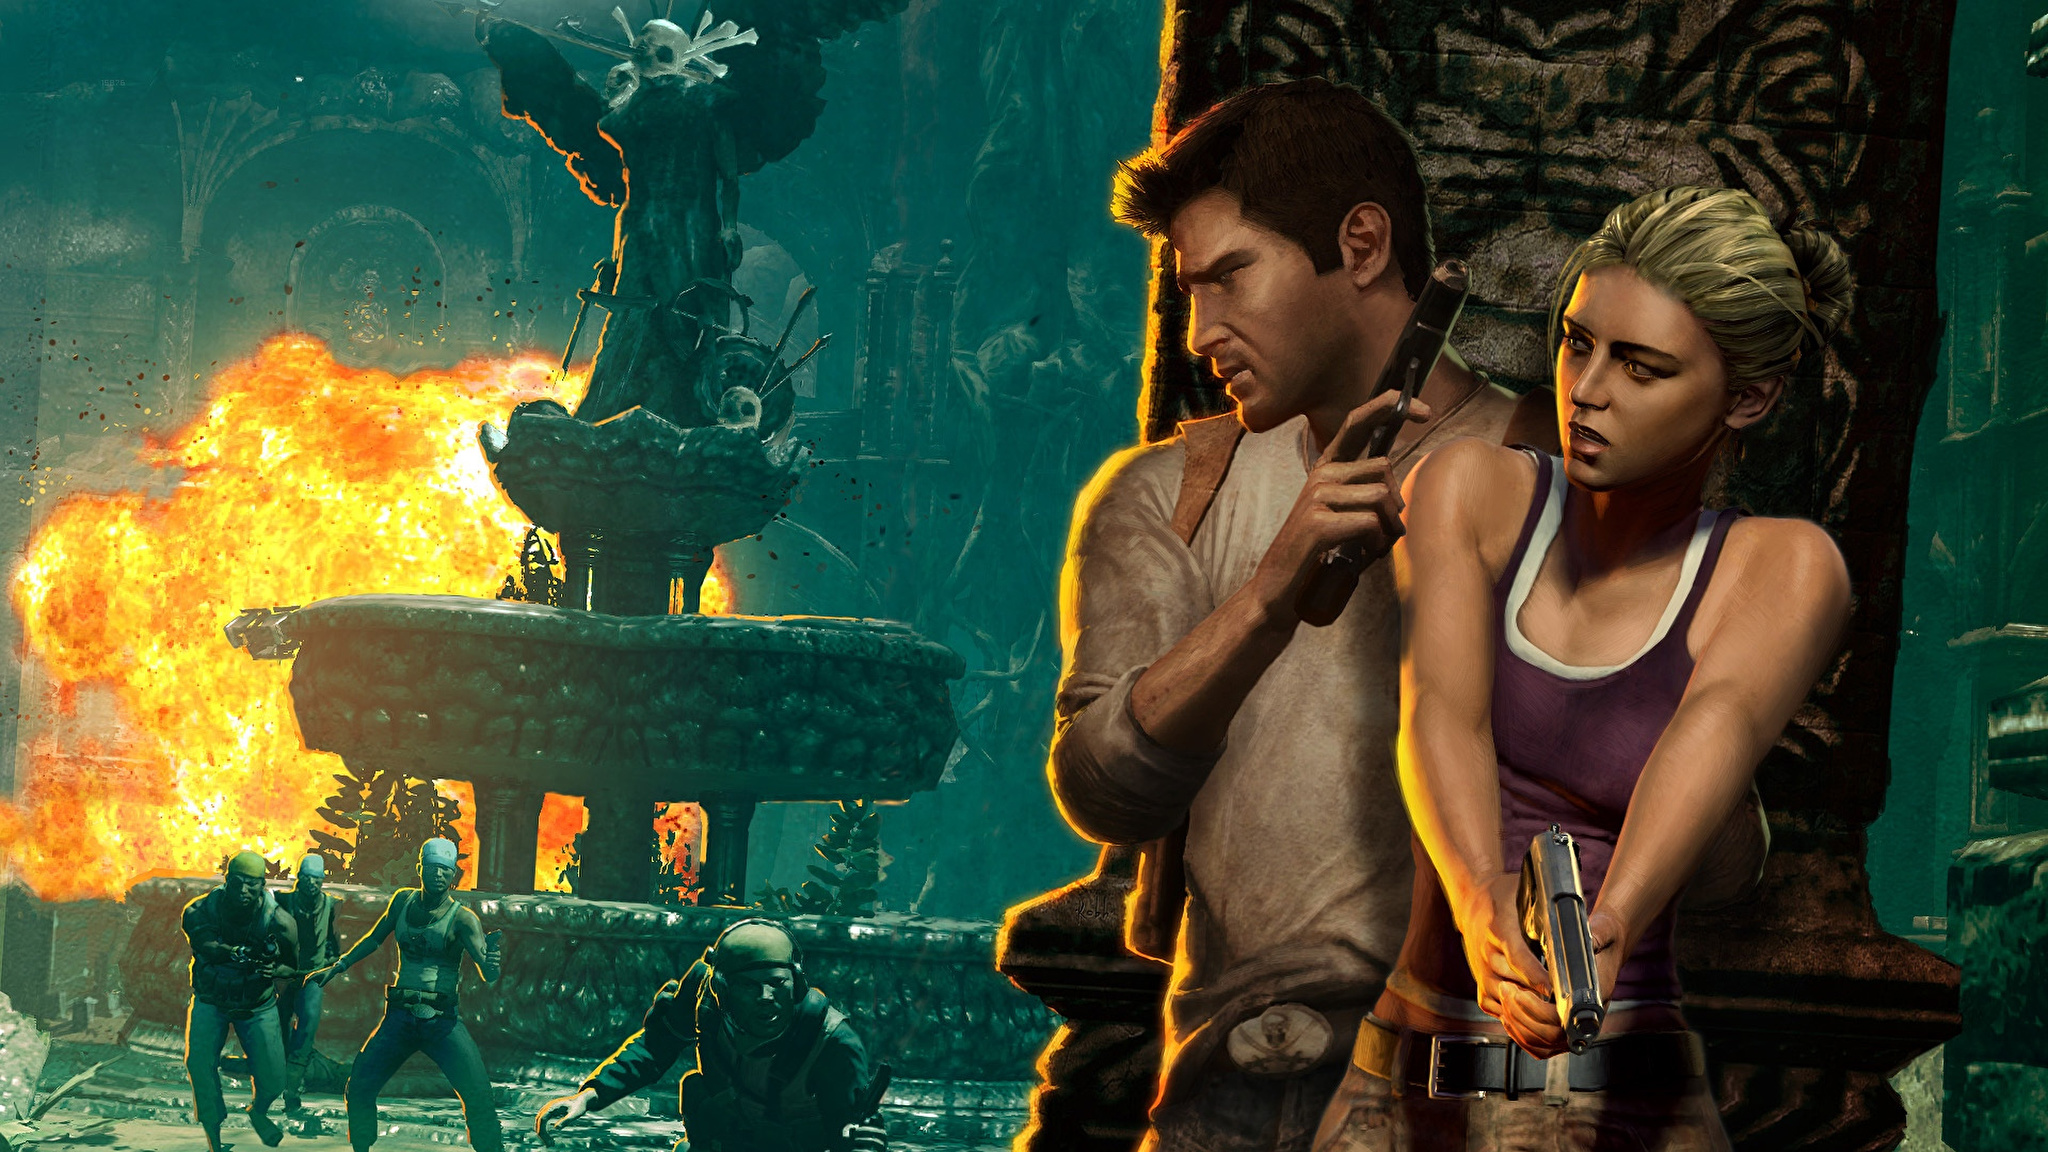 Game s starting. Uncharted: судьба Дрейка. Дрейк анчартед. Uncharted 1 Дрейк.